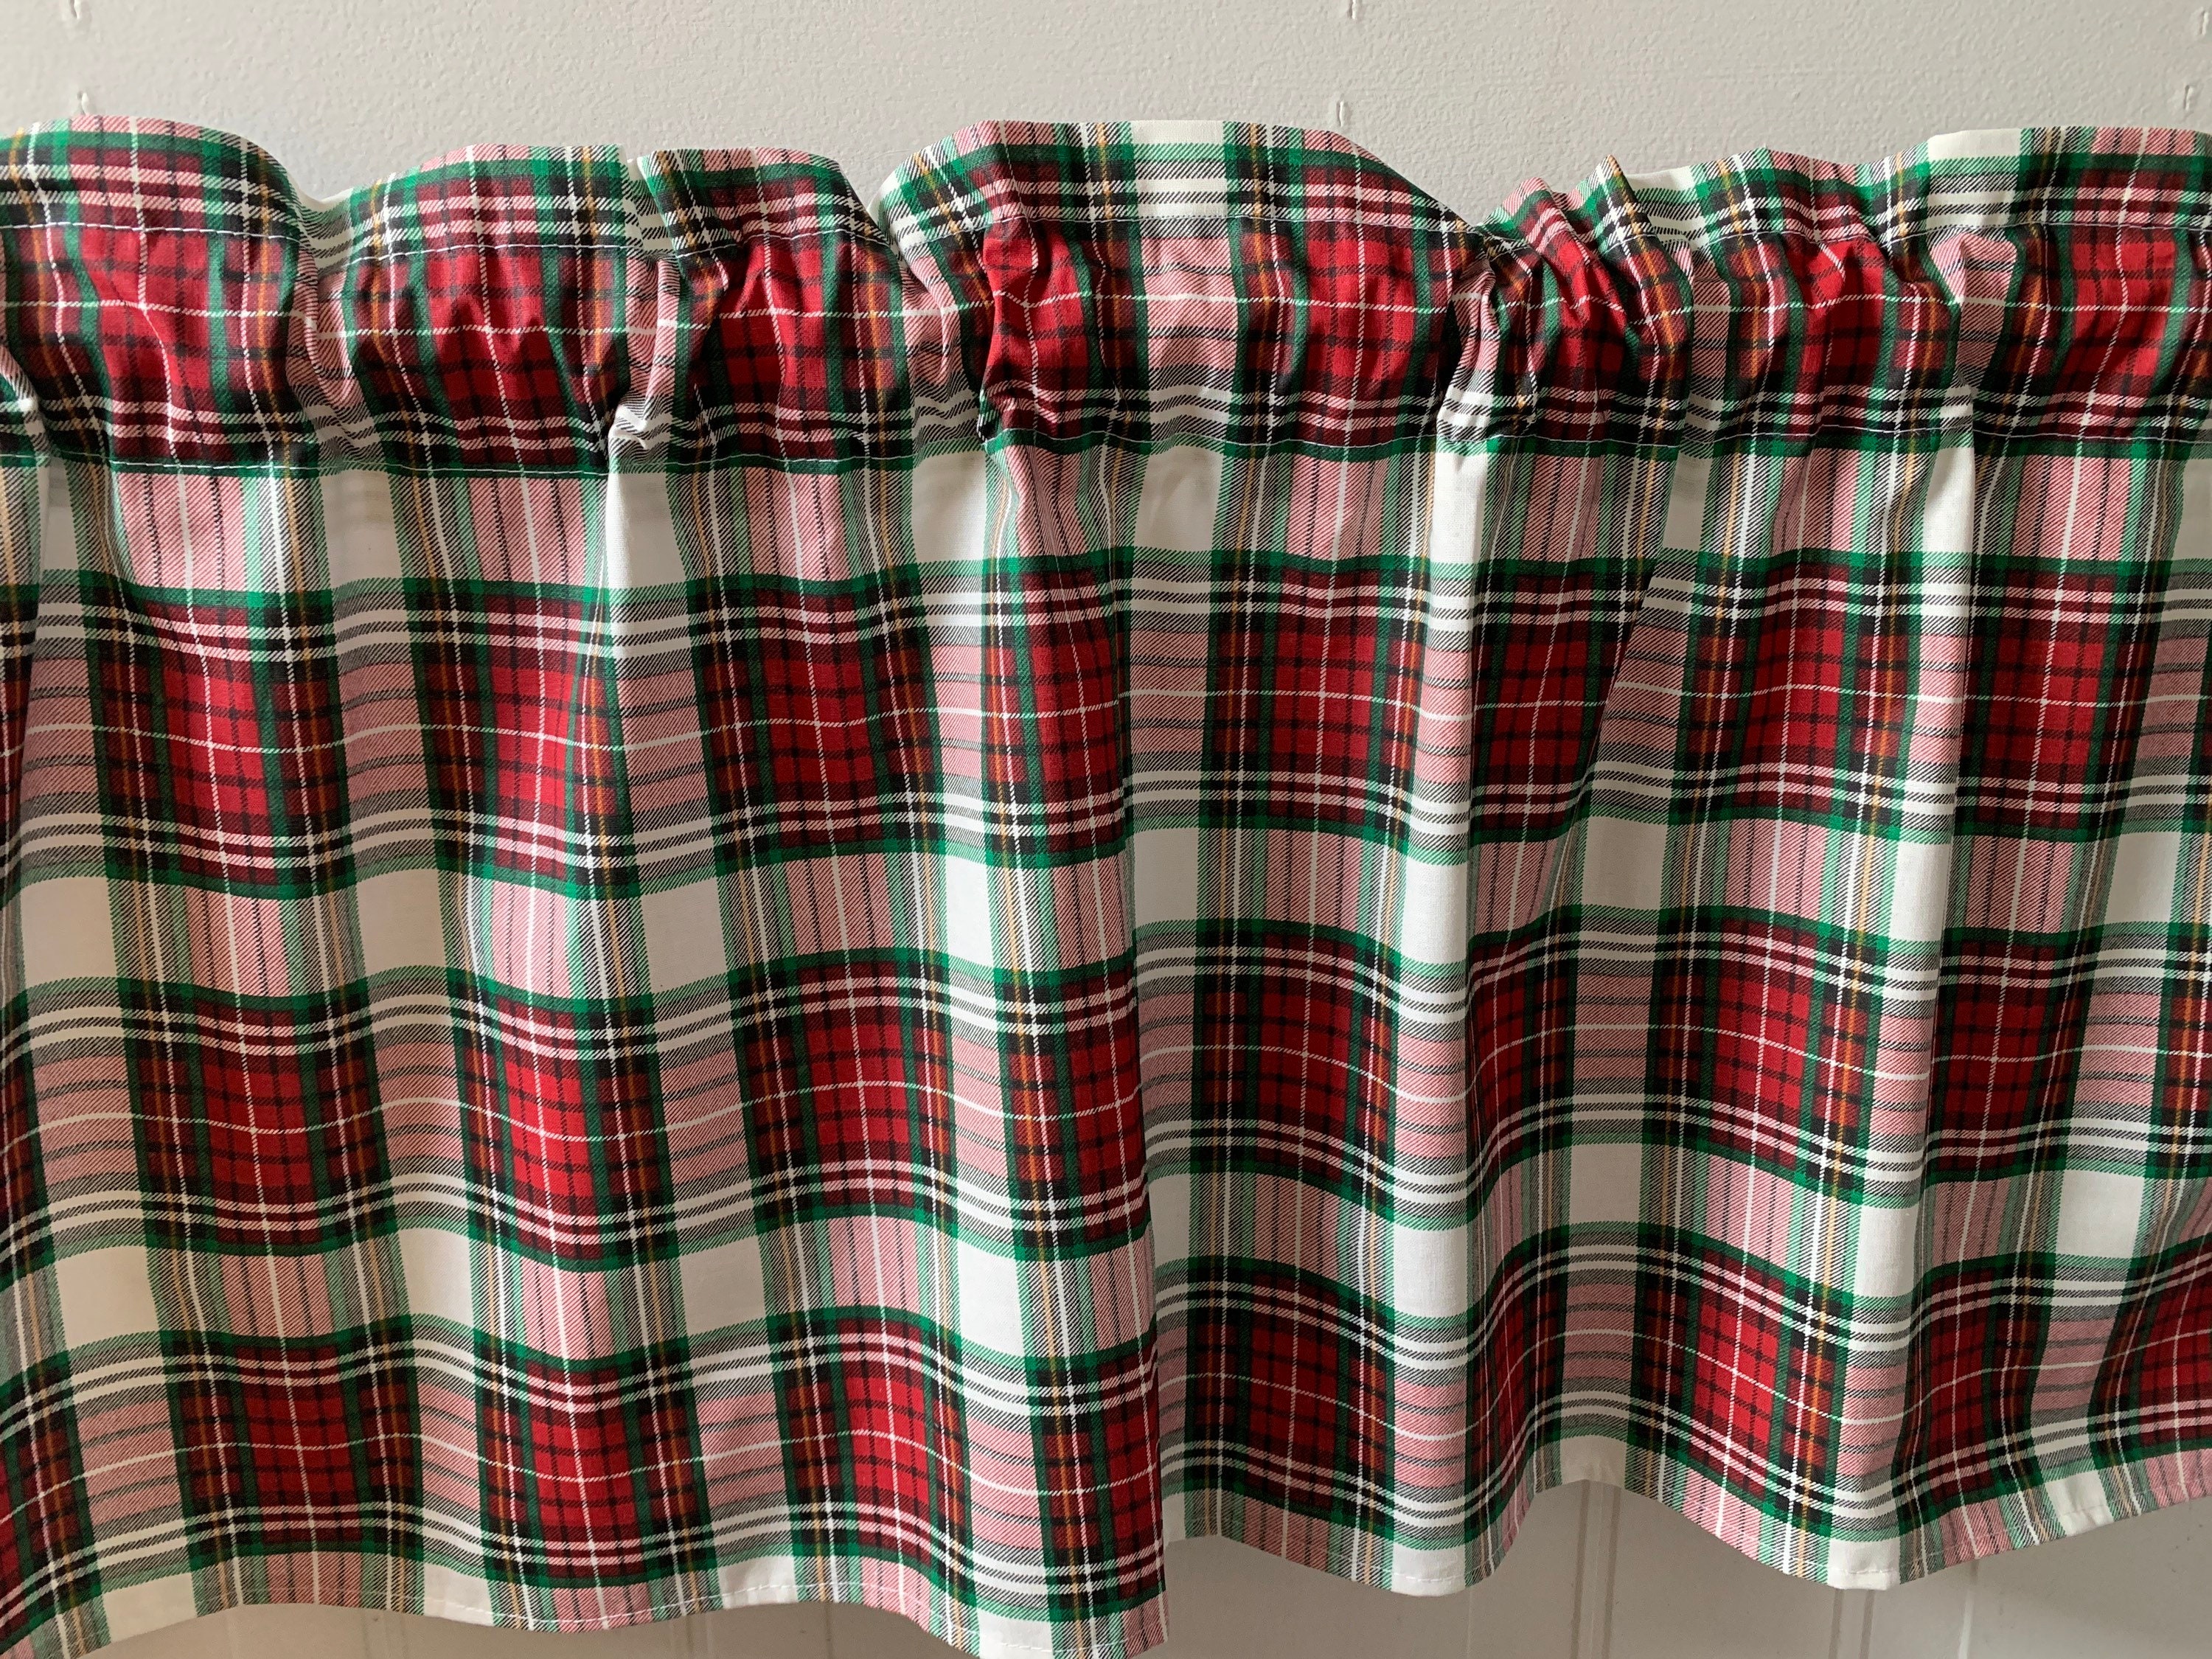  ZJDECOR Green and White Buffalo Plaid Check Kitchen Valance for  Windows, Farmhouse Gingham Plaid Adjustable Tie Up Curtains for Bathroom  Cafe Small Window, Rod Pocket, 56 x 18, Green/White : Clothing